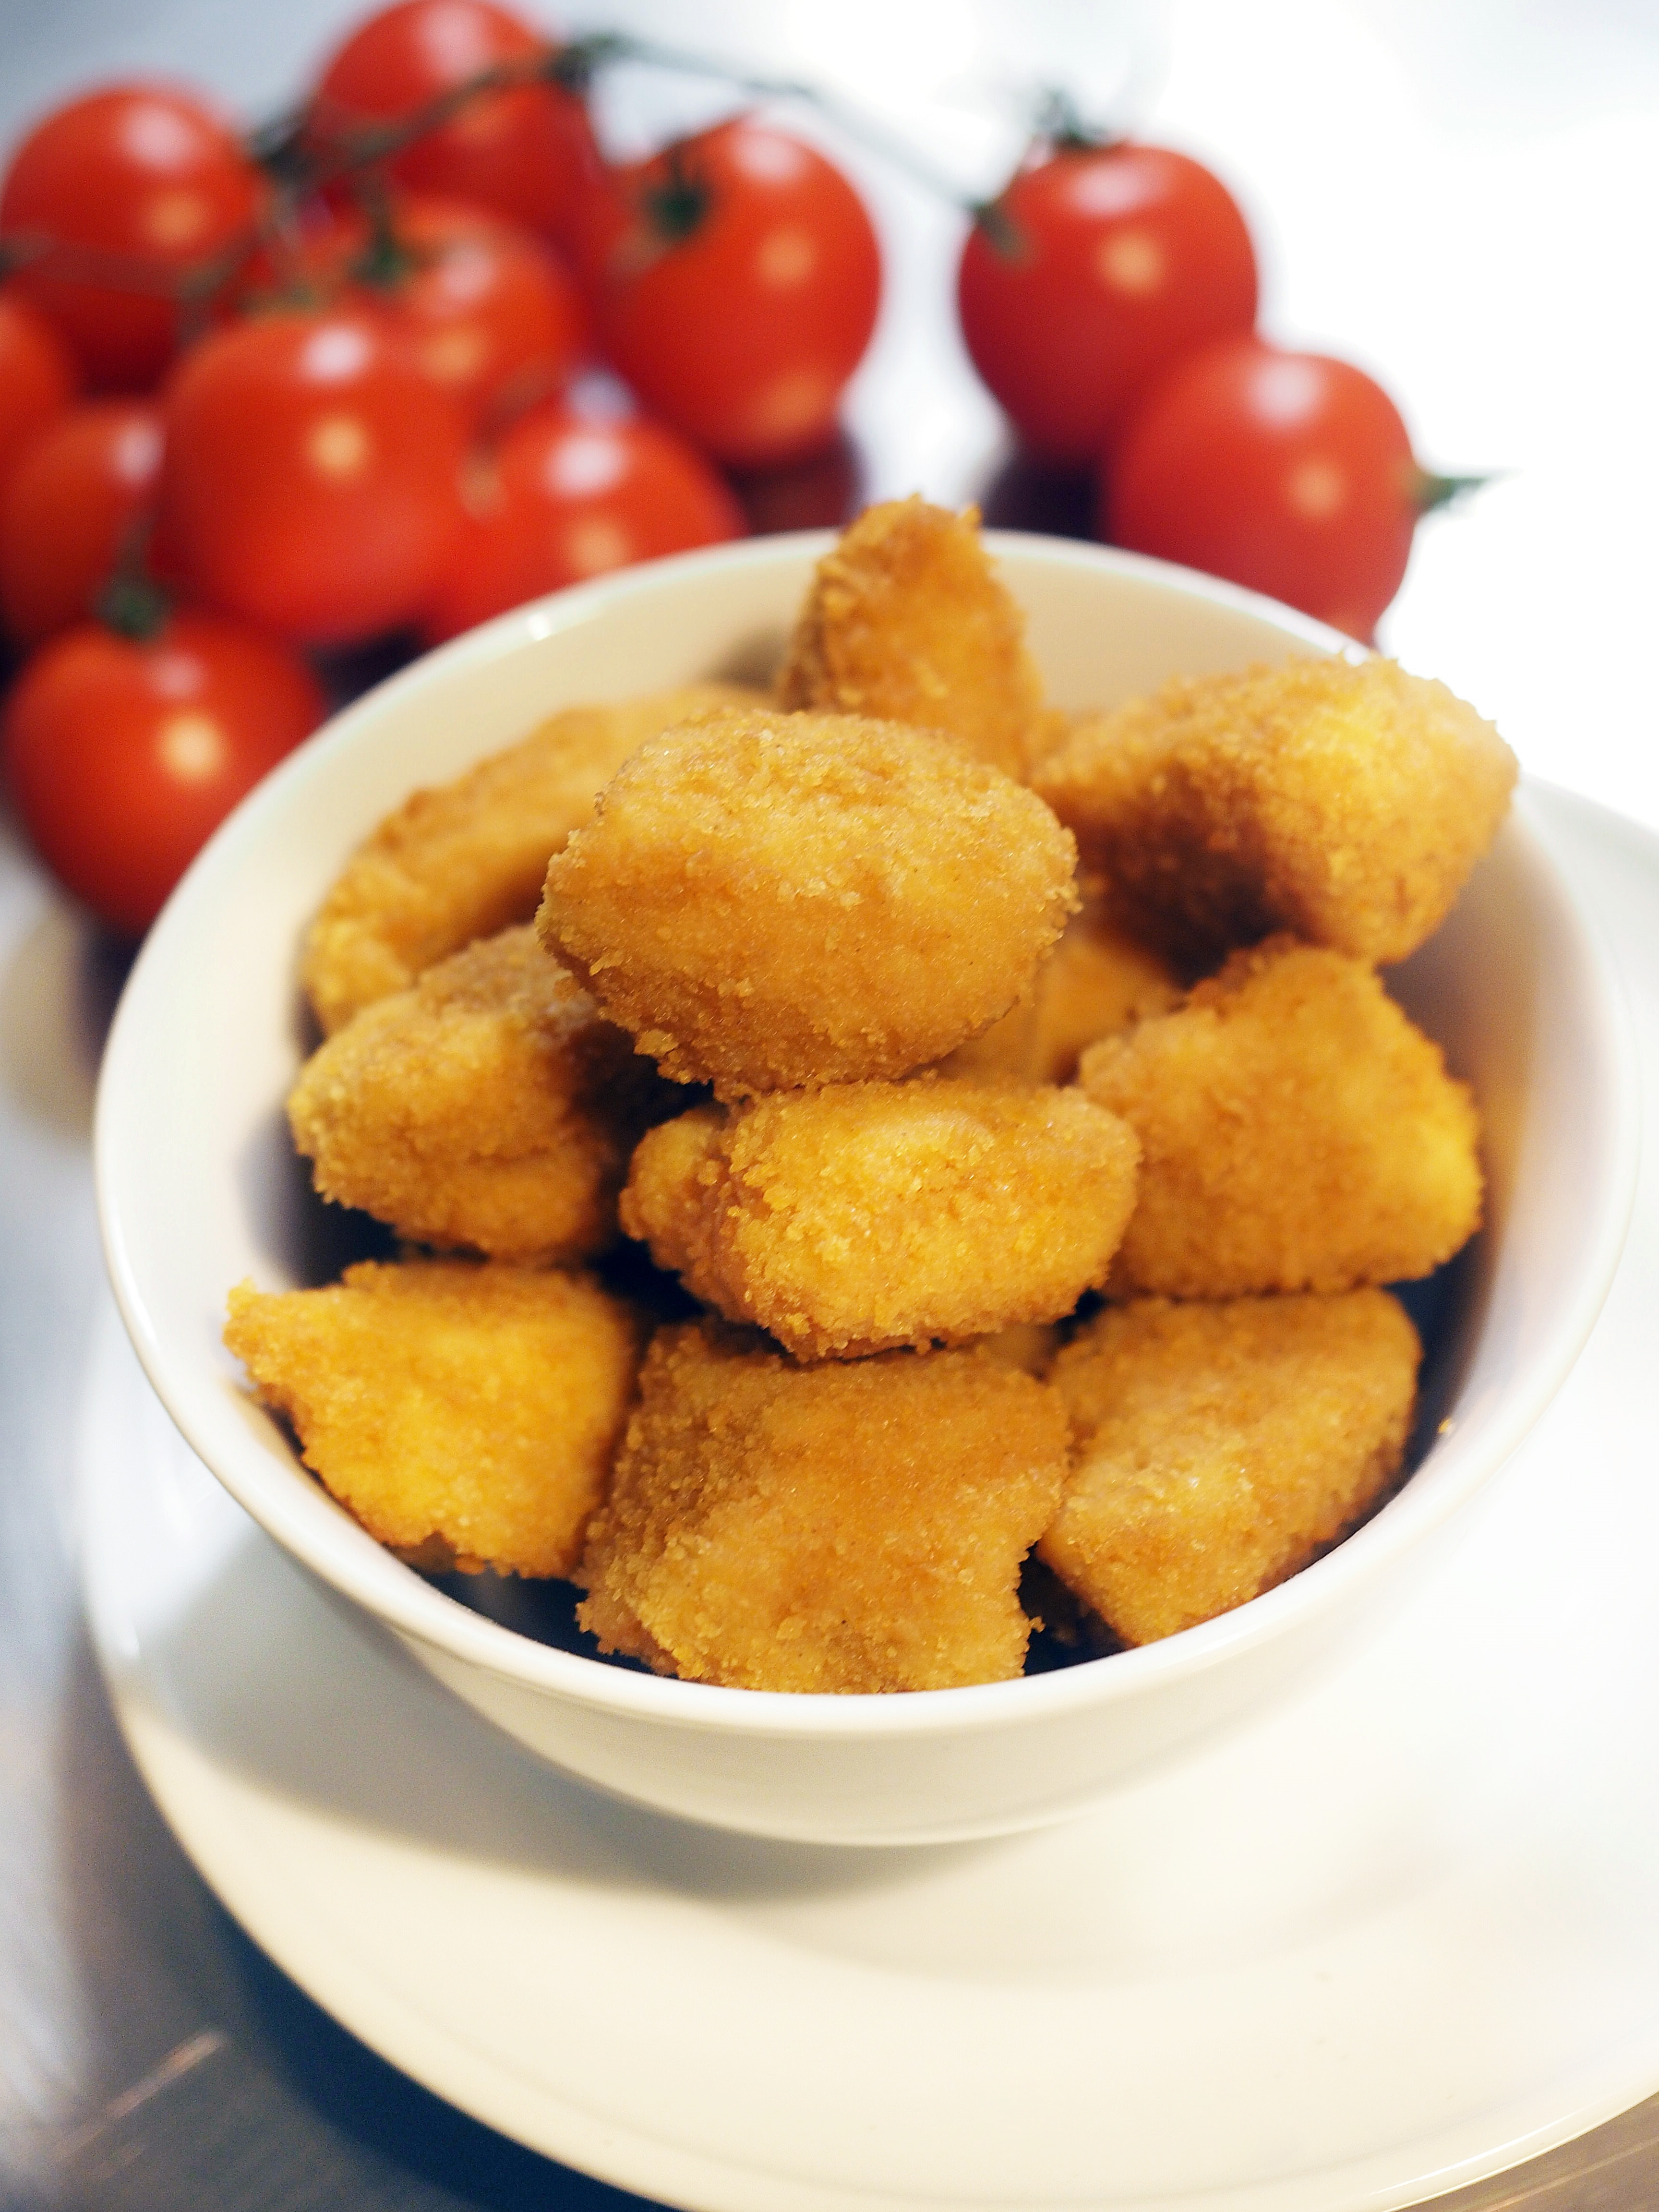 Chicken Nuggets and Tomato Pachino. Italy